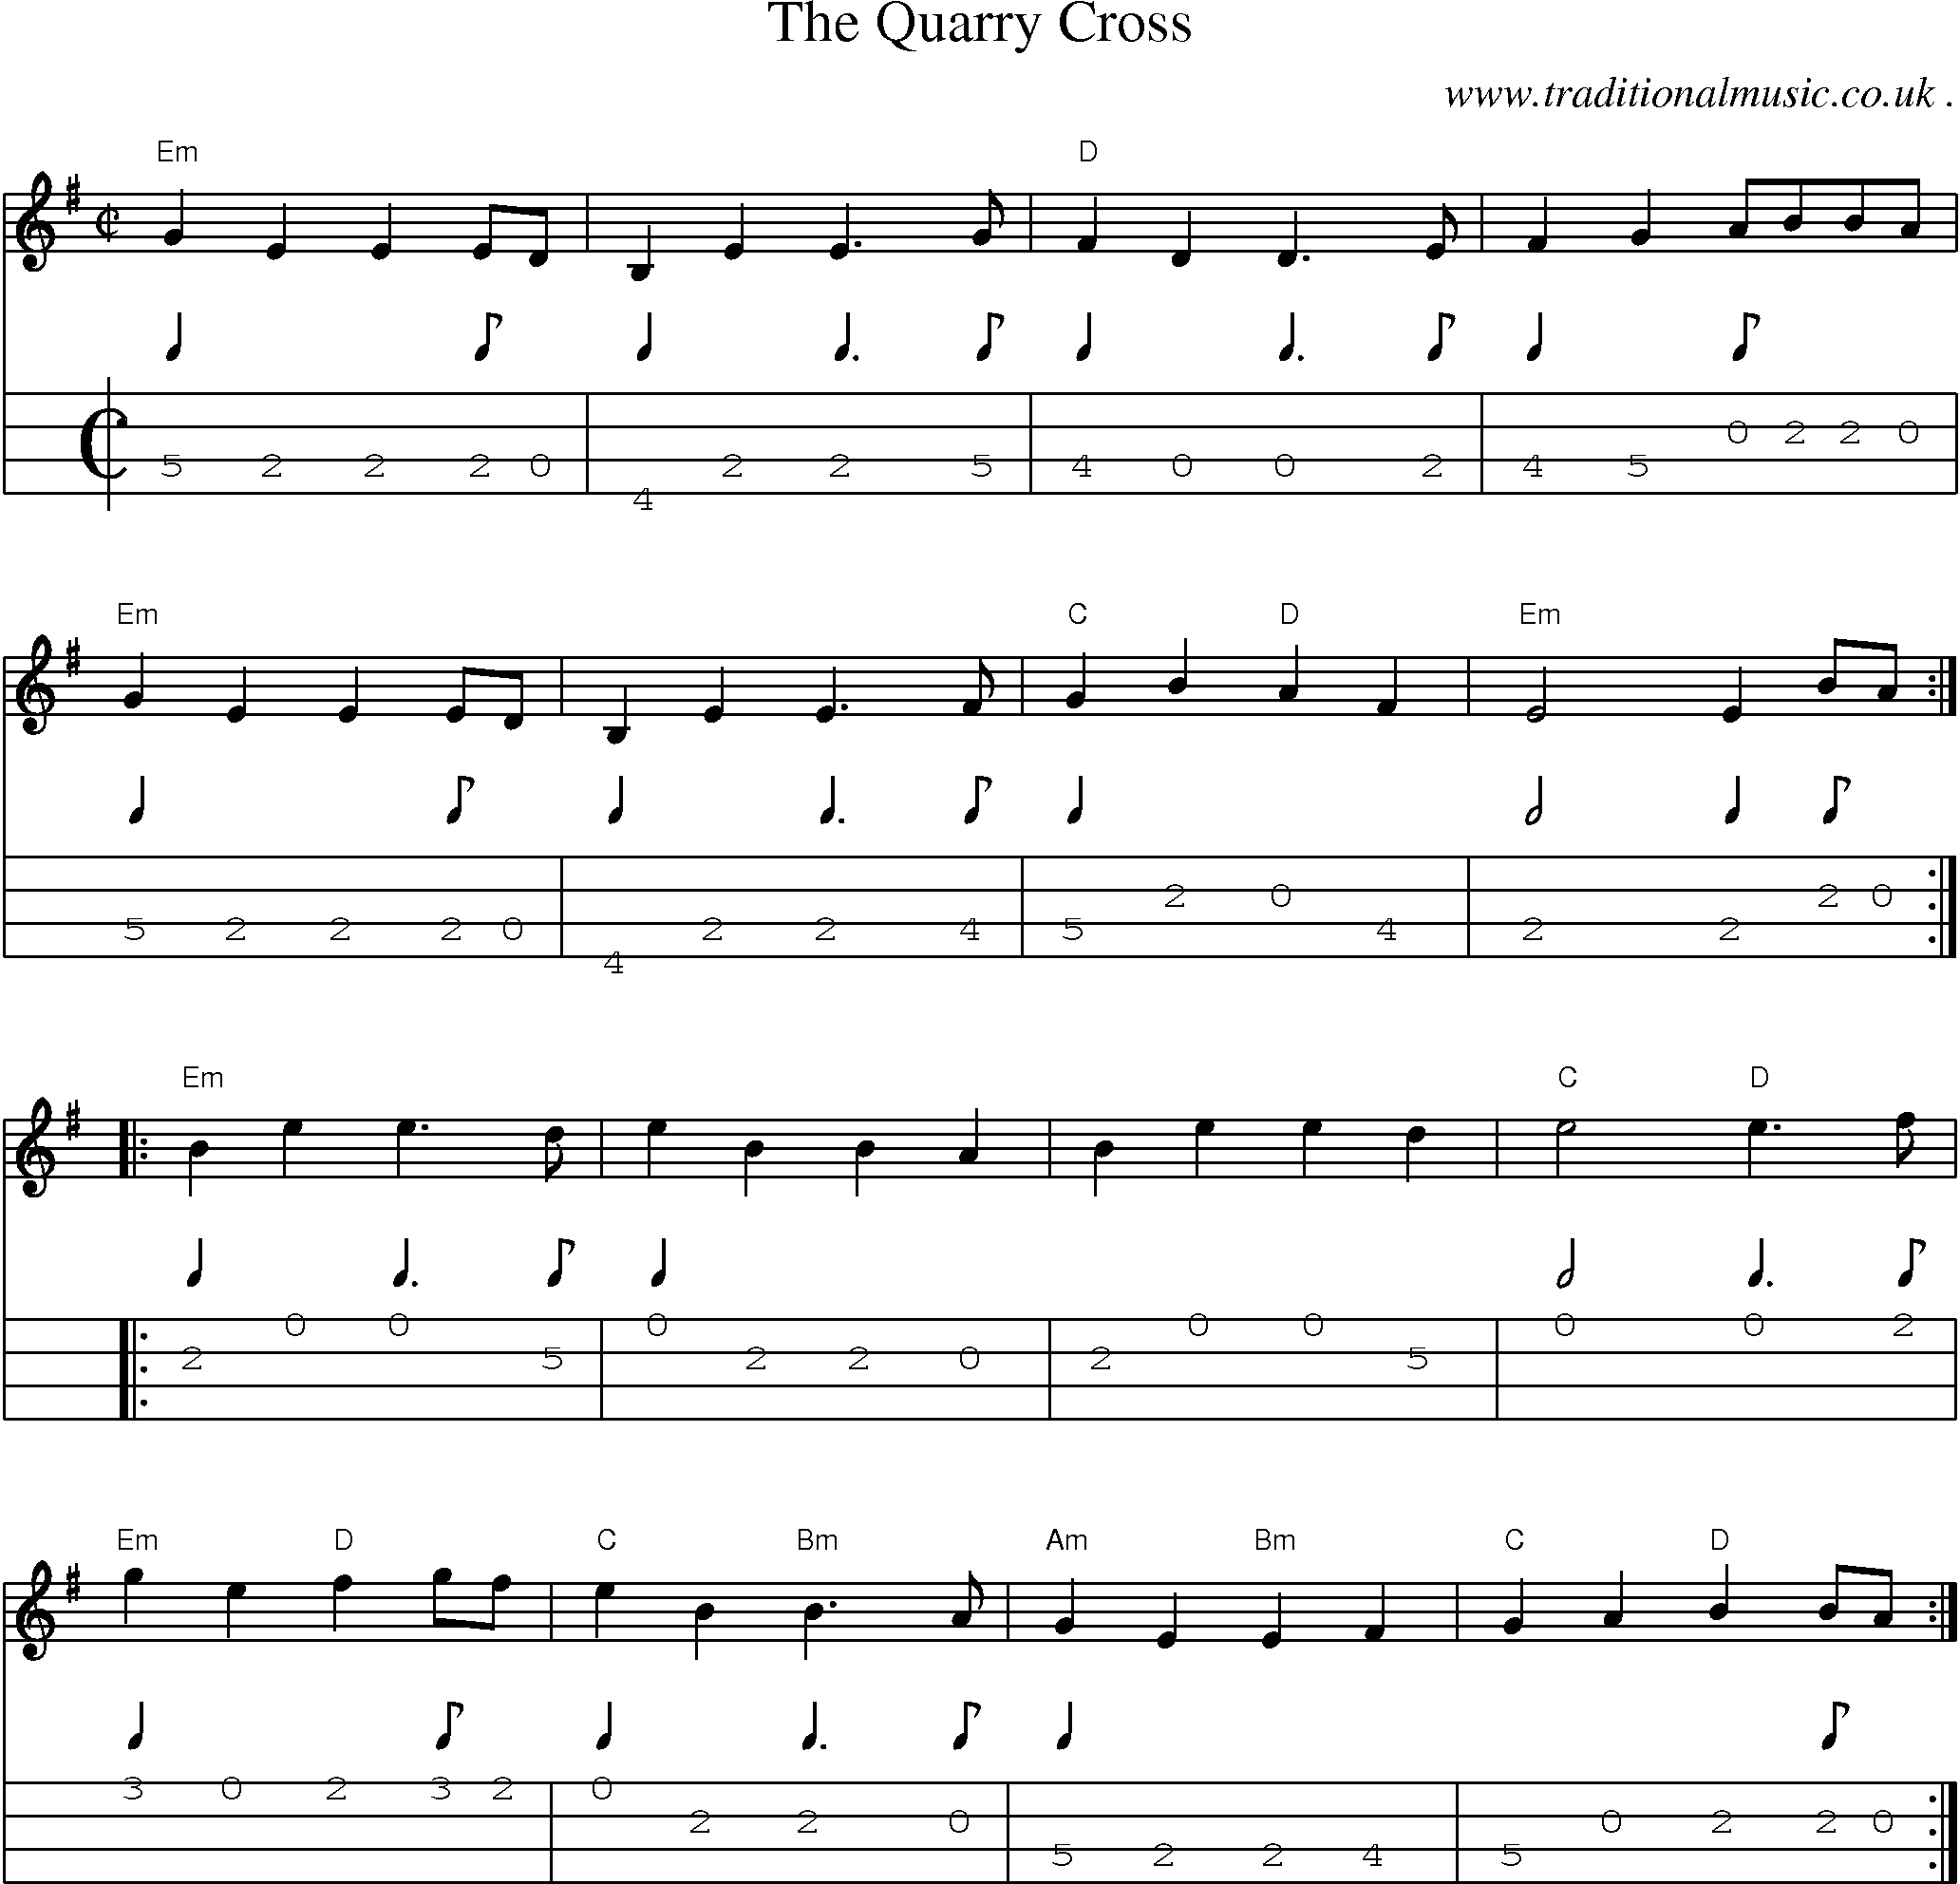 Music Score and Guitar Tabs for The Quarry Cross